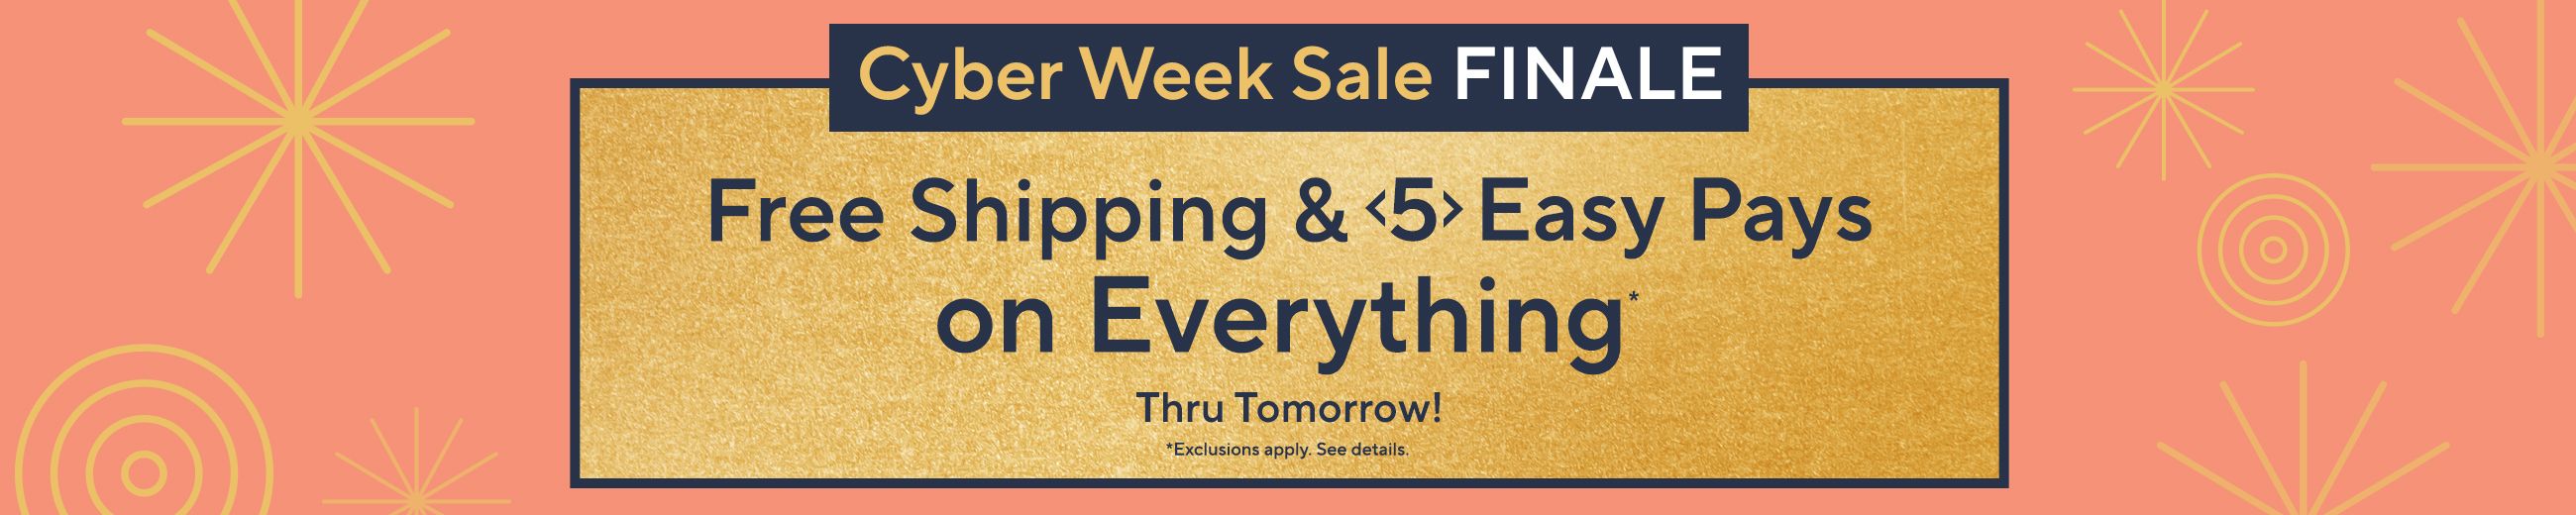 Cyber Week Sale Finale - Free Shipping & 5 Easy Pays on Everything*  Thru Tomorrow! *Exclusions apply. See details.